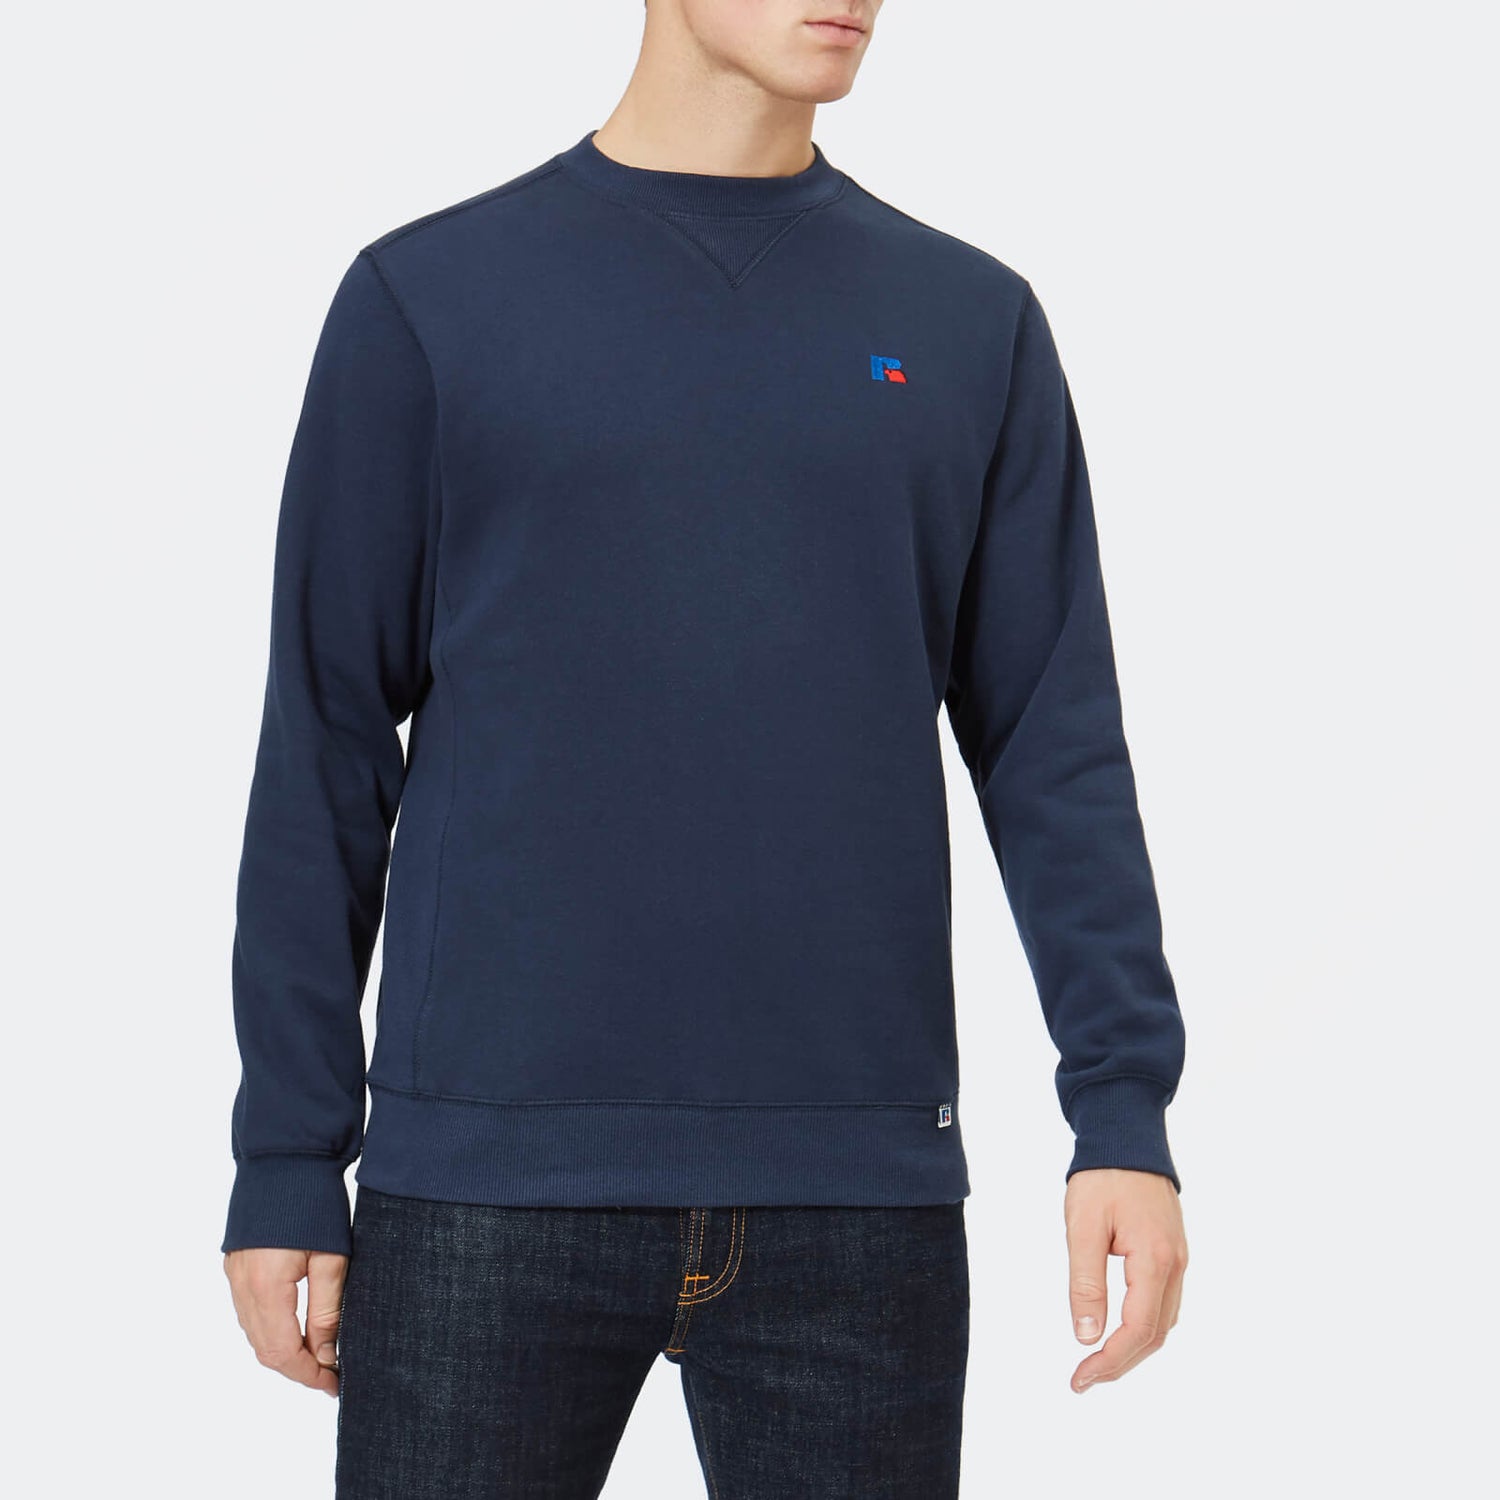 Russell Athletic Frank Sweatshirt Navy - 80s Casual Classics